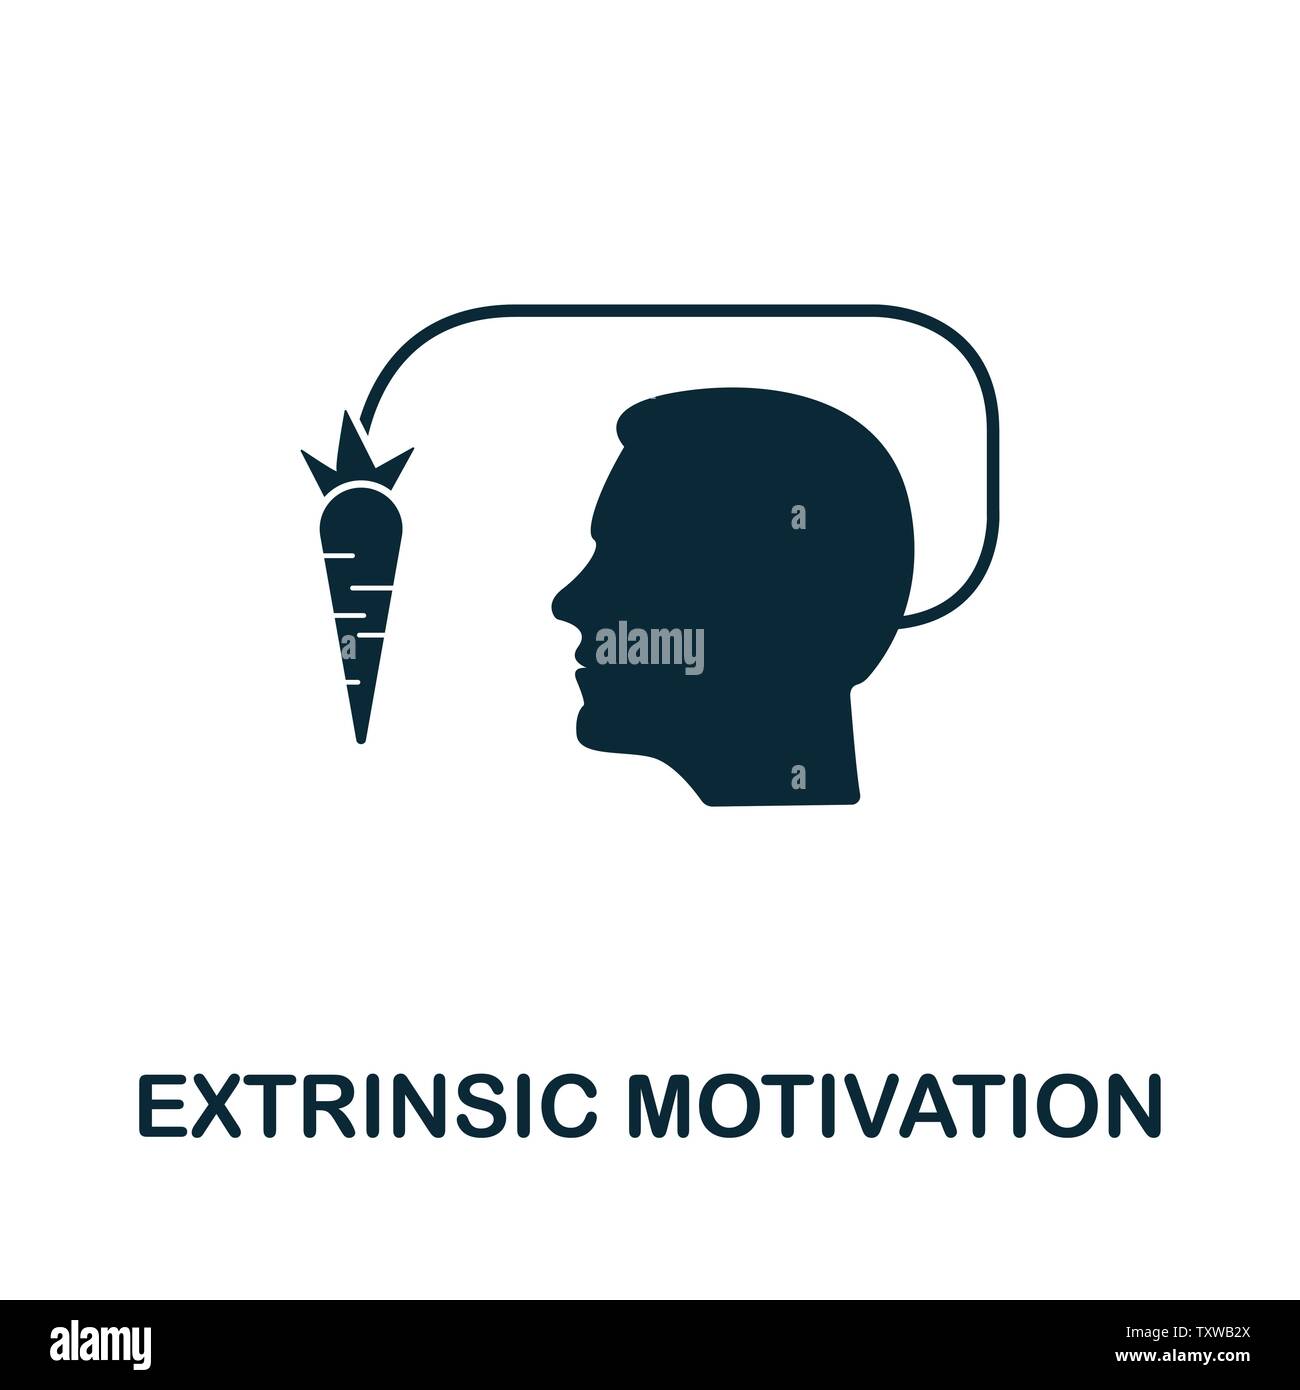 Extrinsic Motivation vector icon symbol. Creative sign from gamification icons collection. Filled flat Extrinsic Motivation icon for computer and Stock Vector